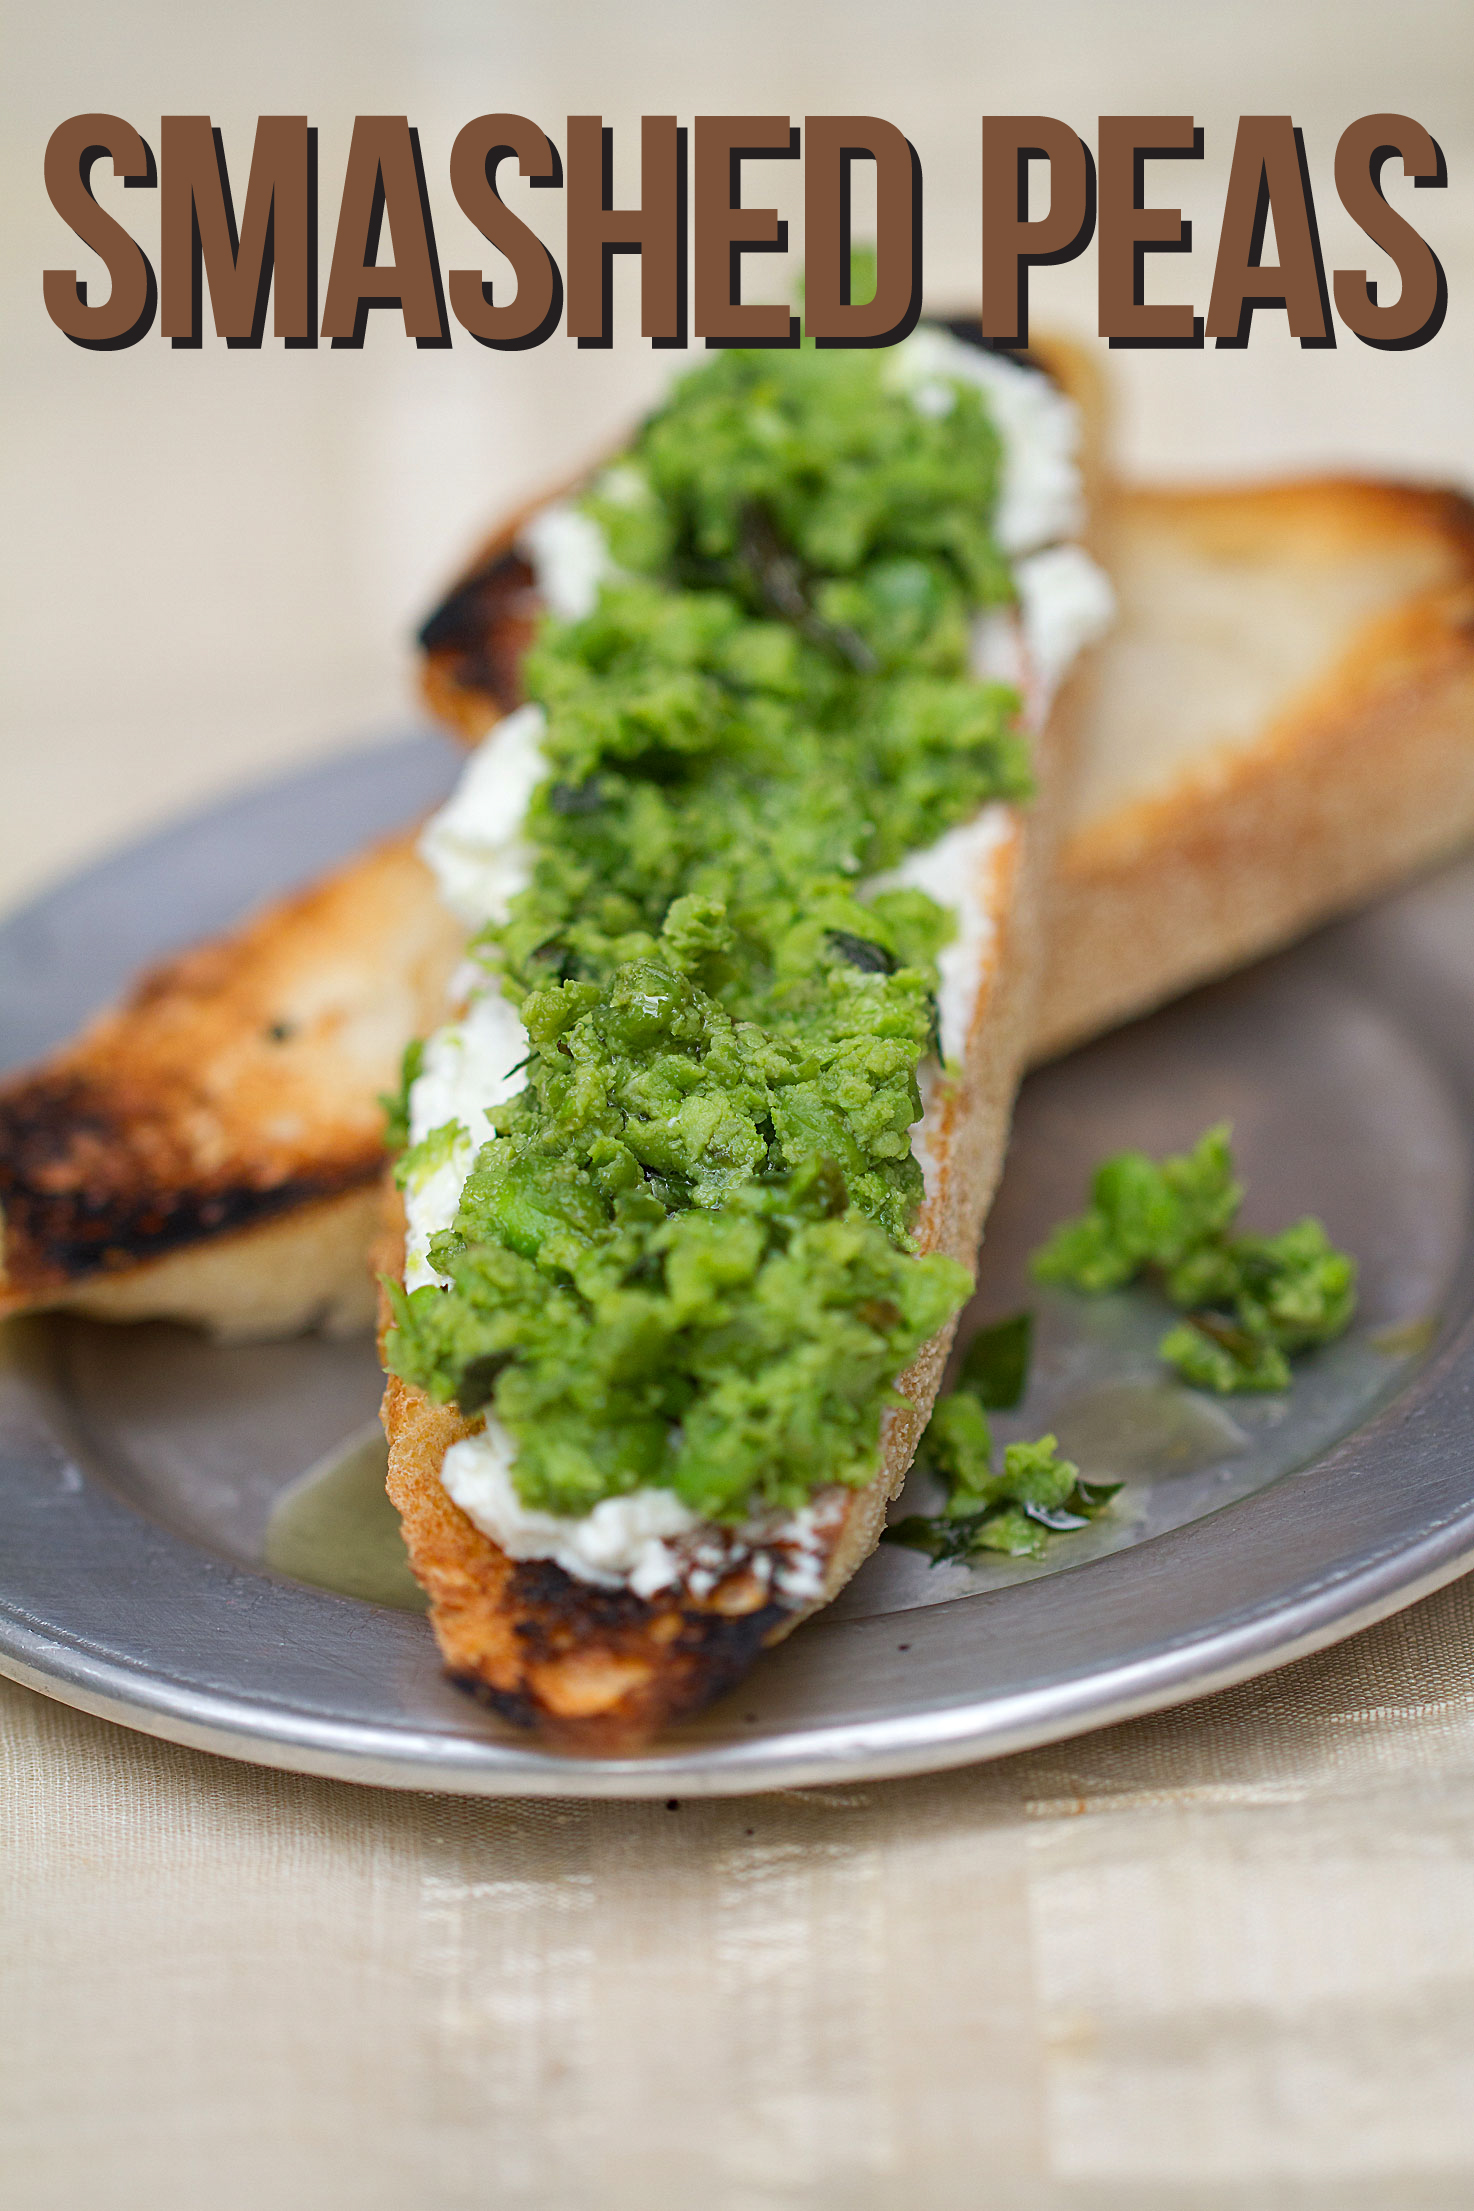 Smashed Peas and Whipped Goat Cheese on Toast